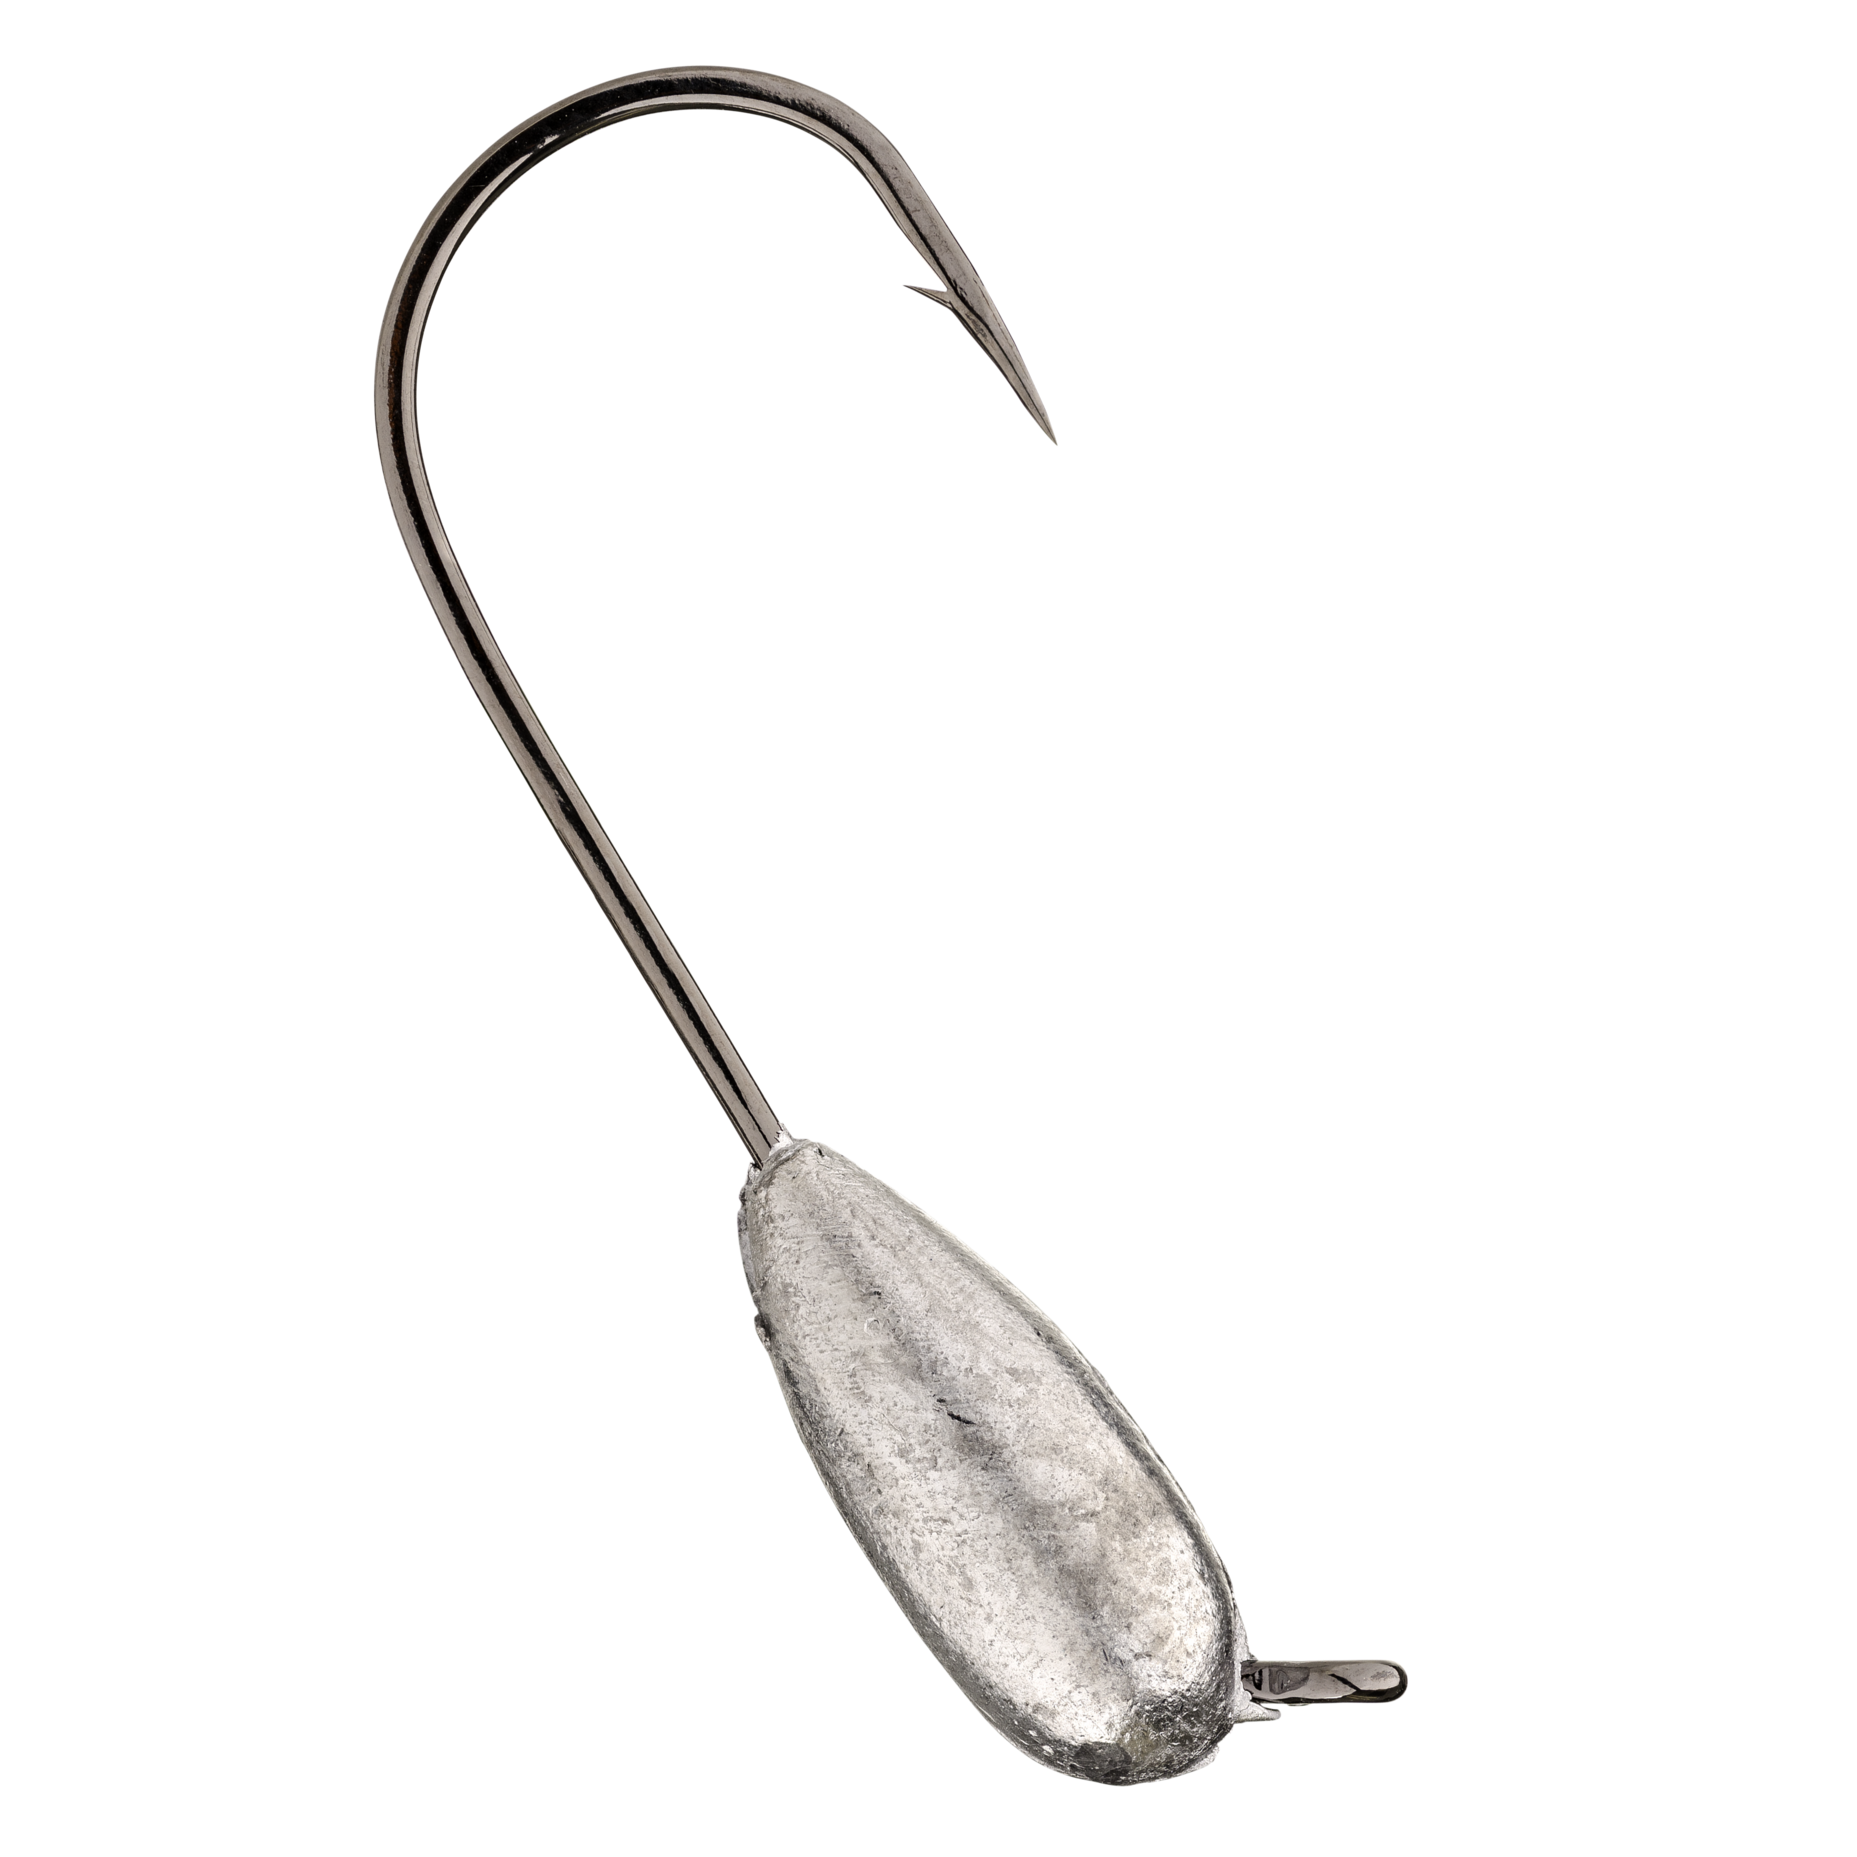 FISH HOOKS Squadron Swimbait Jig Head 3/16oz Gold or Silver NEW Strike King  Baby